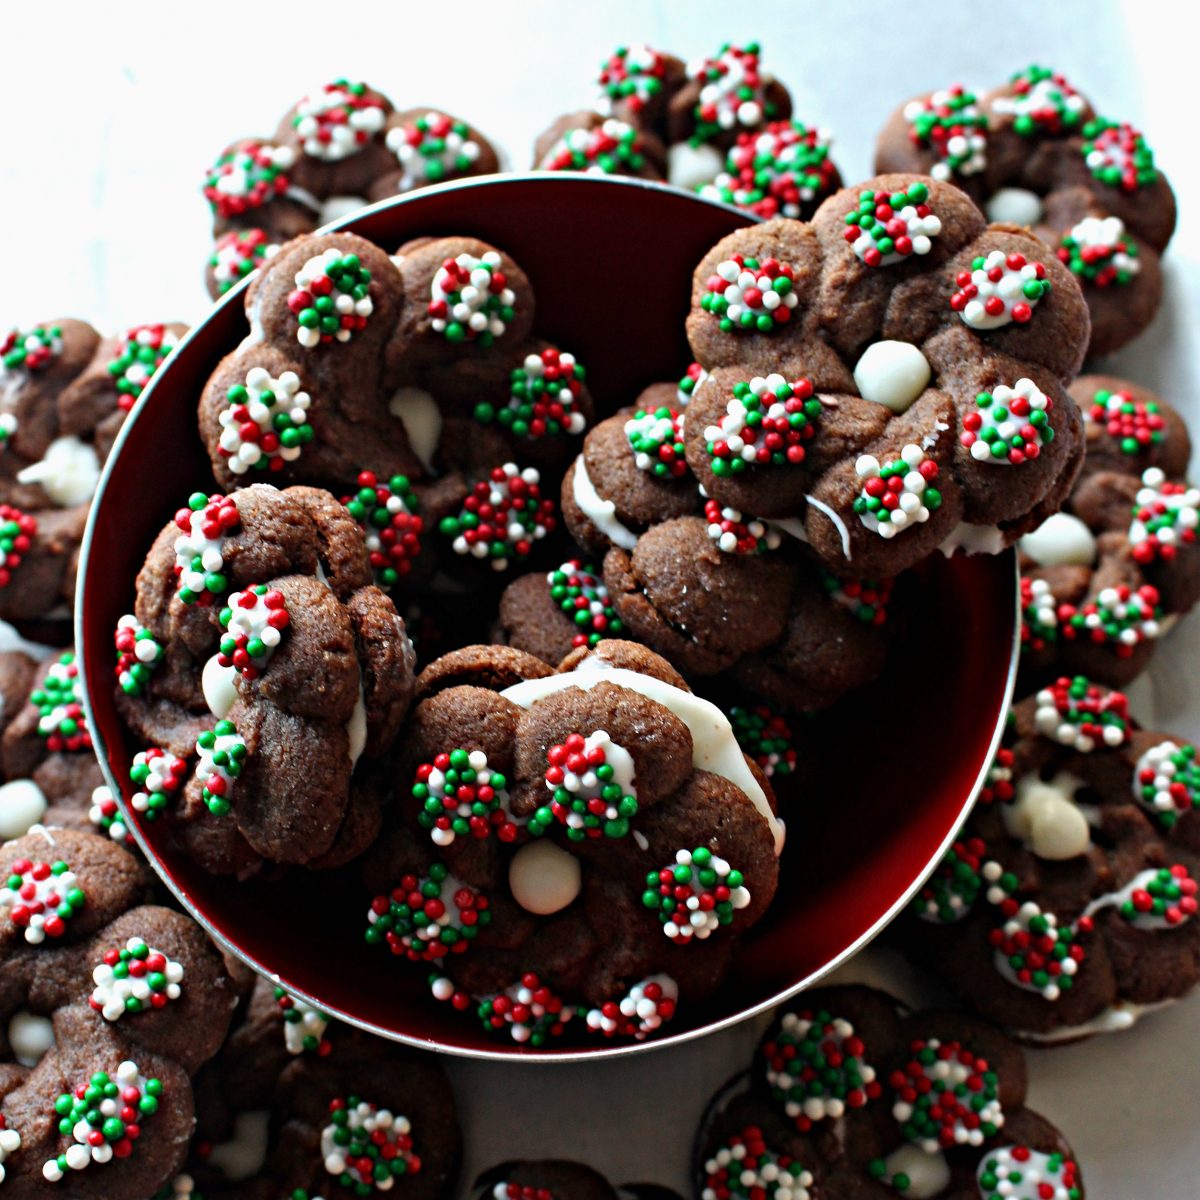 Bowl of Chocolate Espresso cookie wreaths, sandwiched with white chocolate, topped with red and green nonpareils.